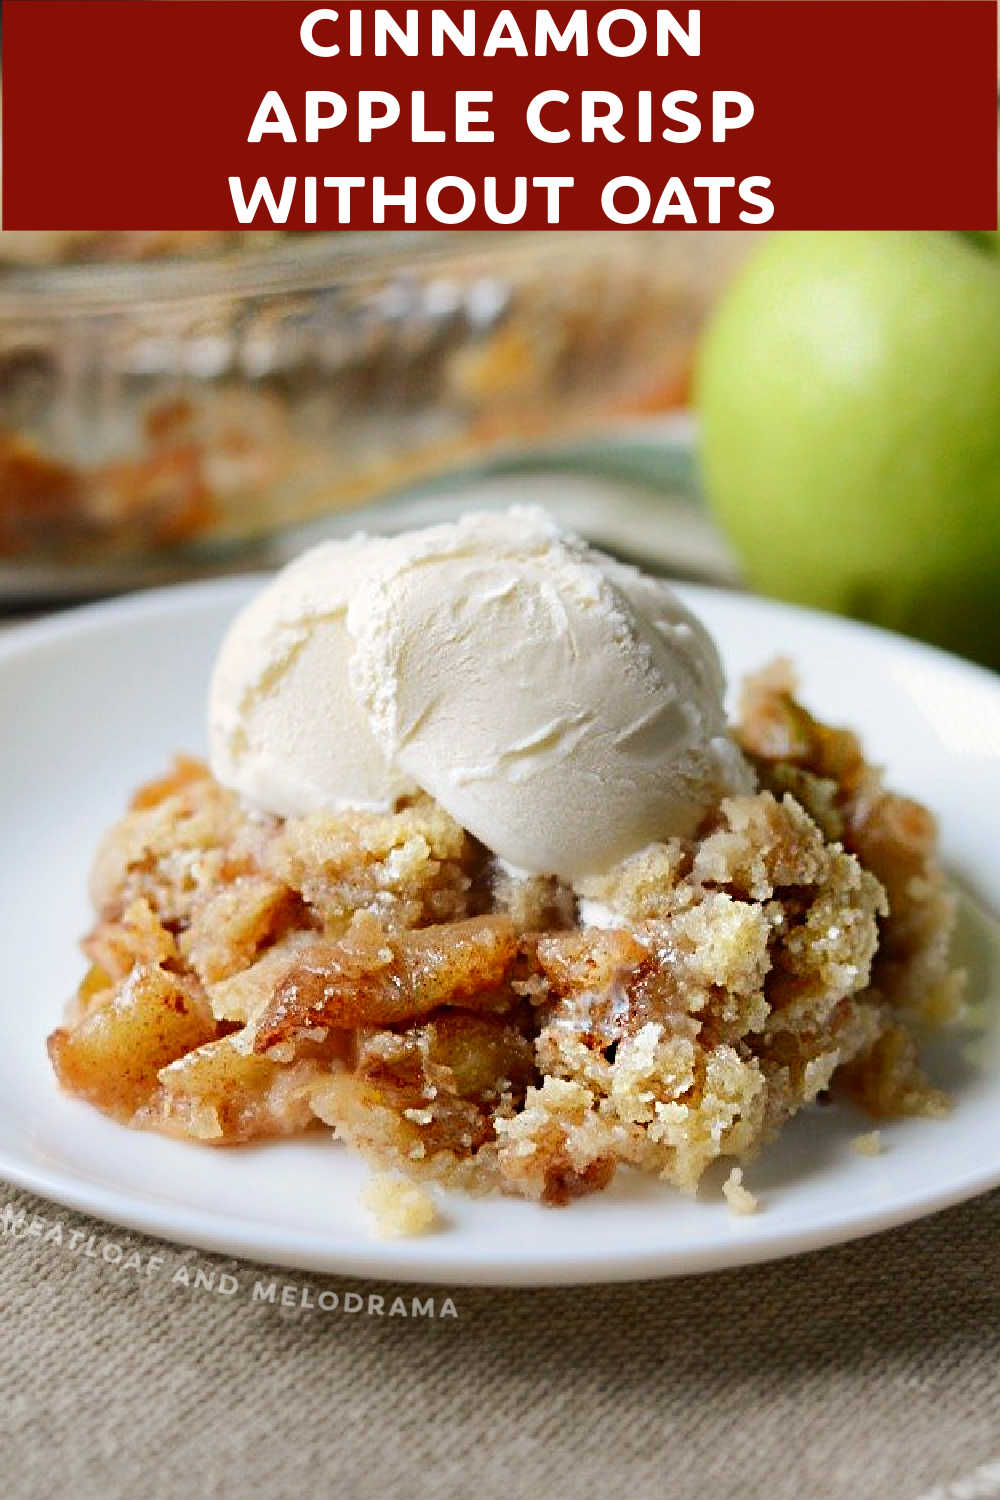 Cinnamon Apple Crisp without Oats is one of the best apple desserts for fall. This easy apple crisp recipe is made with Granny Smith apples, brown sugar and plenty of cinnamon, and it's even better when topped with a scoop of vanilla ice cream and caramel sauce! via @meamel